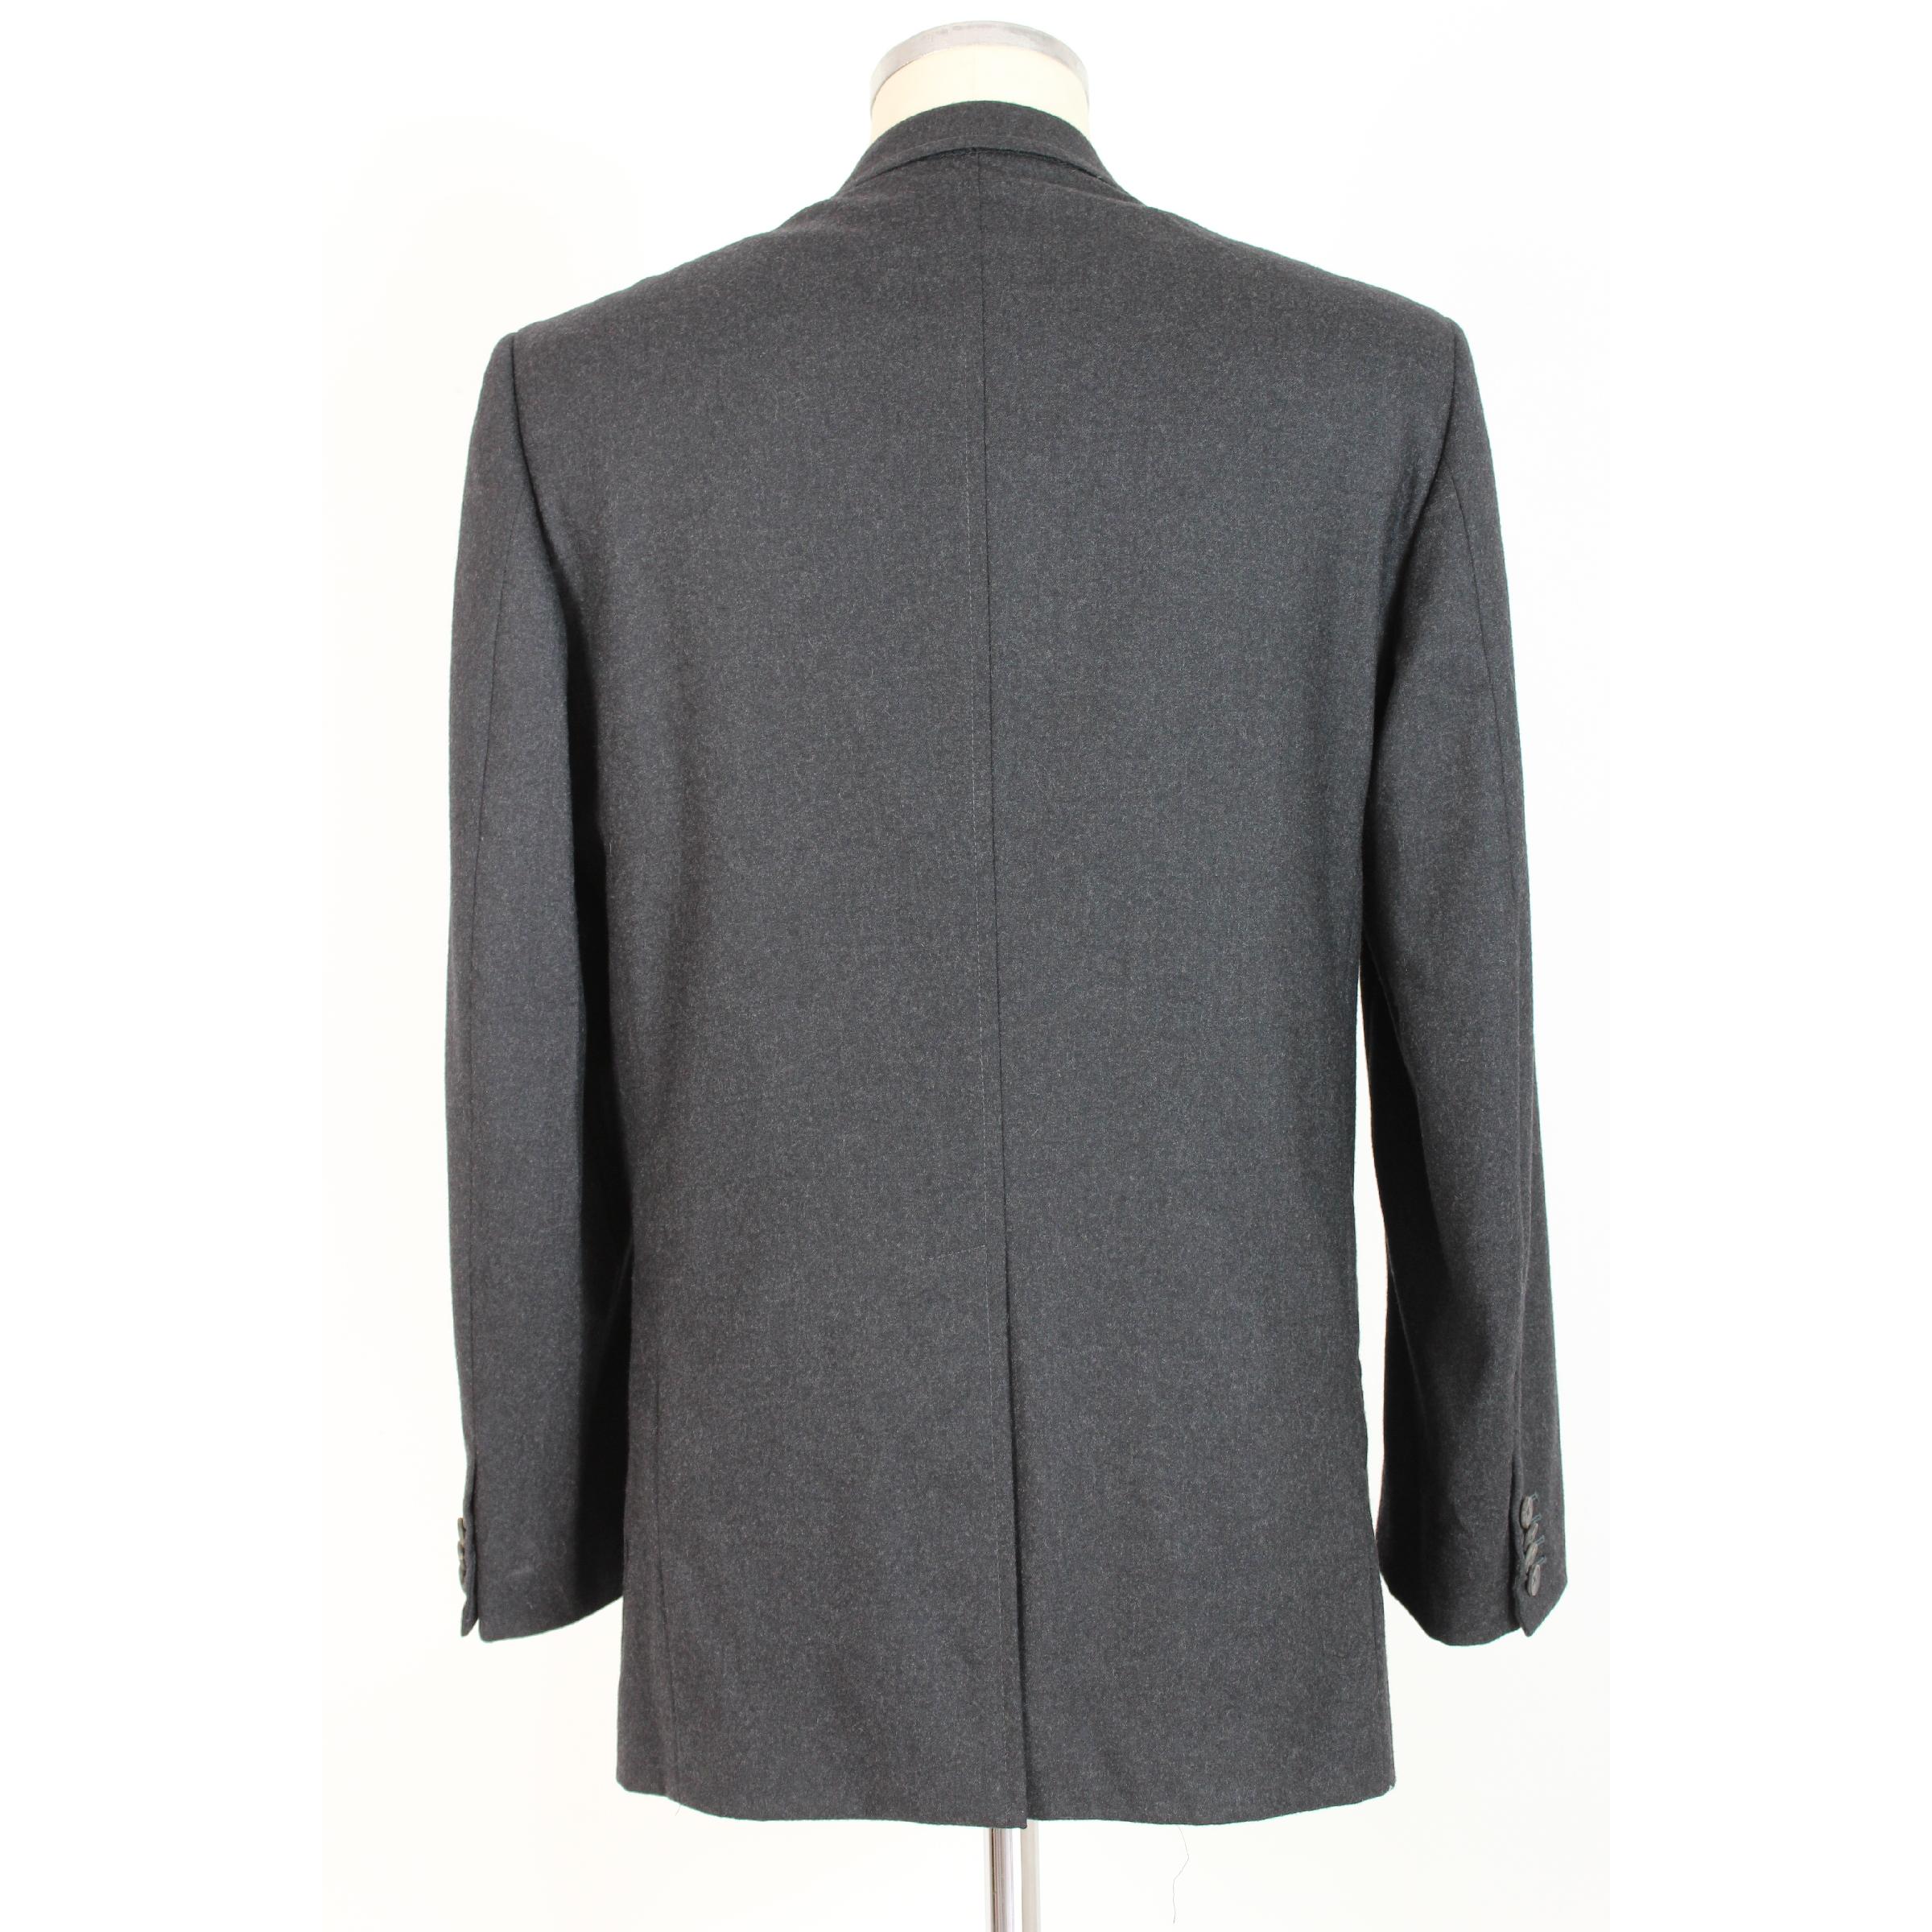 Gucci vintage men's jacket, dark gray, 94% wool 6% elastane. Lined interior with monogrammed print Two pockets on the sides and one on the chest. 1990s. Excellent vintage conditions. Made in Italy.

Size: 48 It 38 Us 38 Uk

Shoulder: 48 cm
Bust /